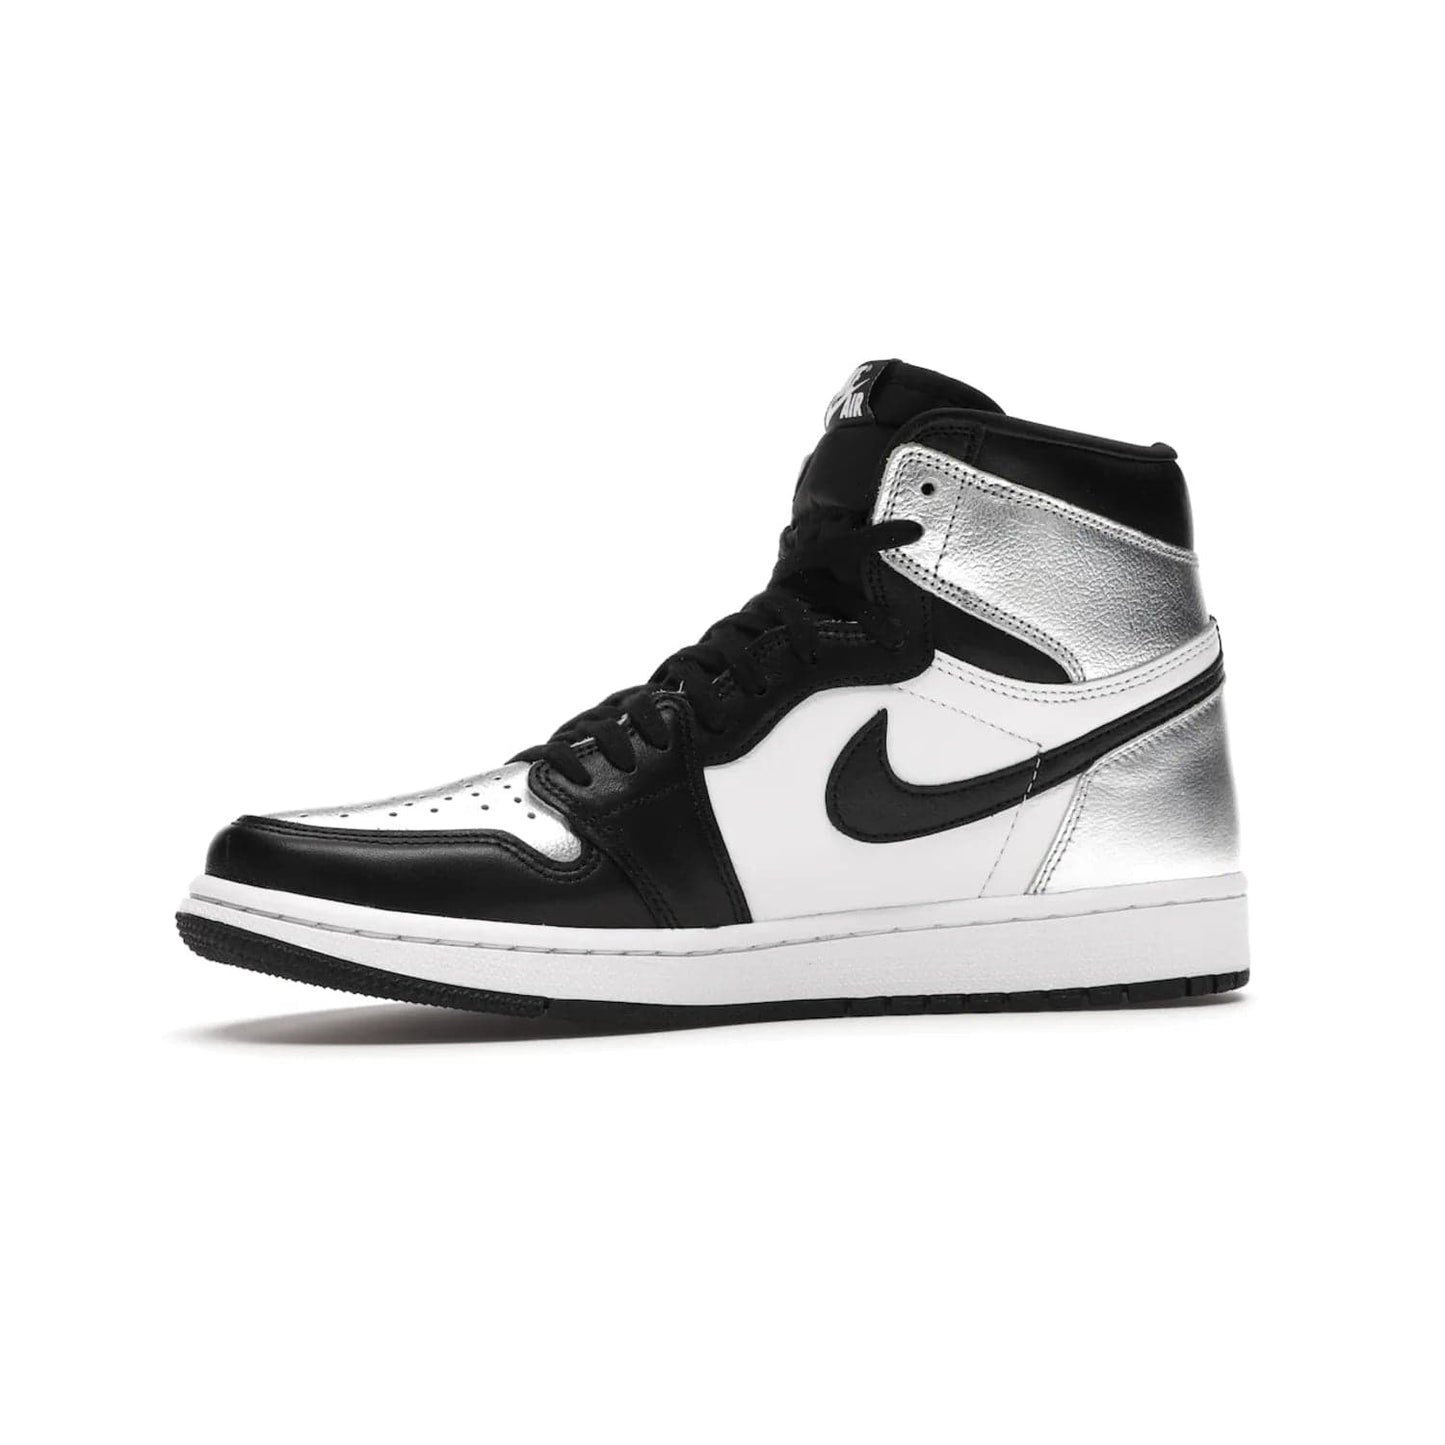 Jordan 1 Retro High Silver Toe (Women's) - Image 17 - Only at www.BallersClubKickz.com - Introducing the Jordan 1 Retro High Silver Toe (Women's): an updated spin on the iconic 'Black Toe' theme. Featuring white & black leather and silver patent leather construction. Nike Air branding, Air Jordan Wings logo, and white/black sole finish give a classic look. The perfect addition to an on-trend streetwear look. Available in classic black & white, this Jordan 1 is an instant classic. Released in February 20